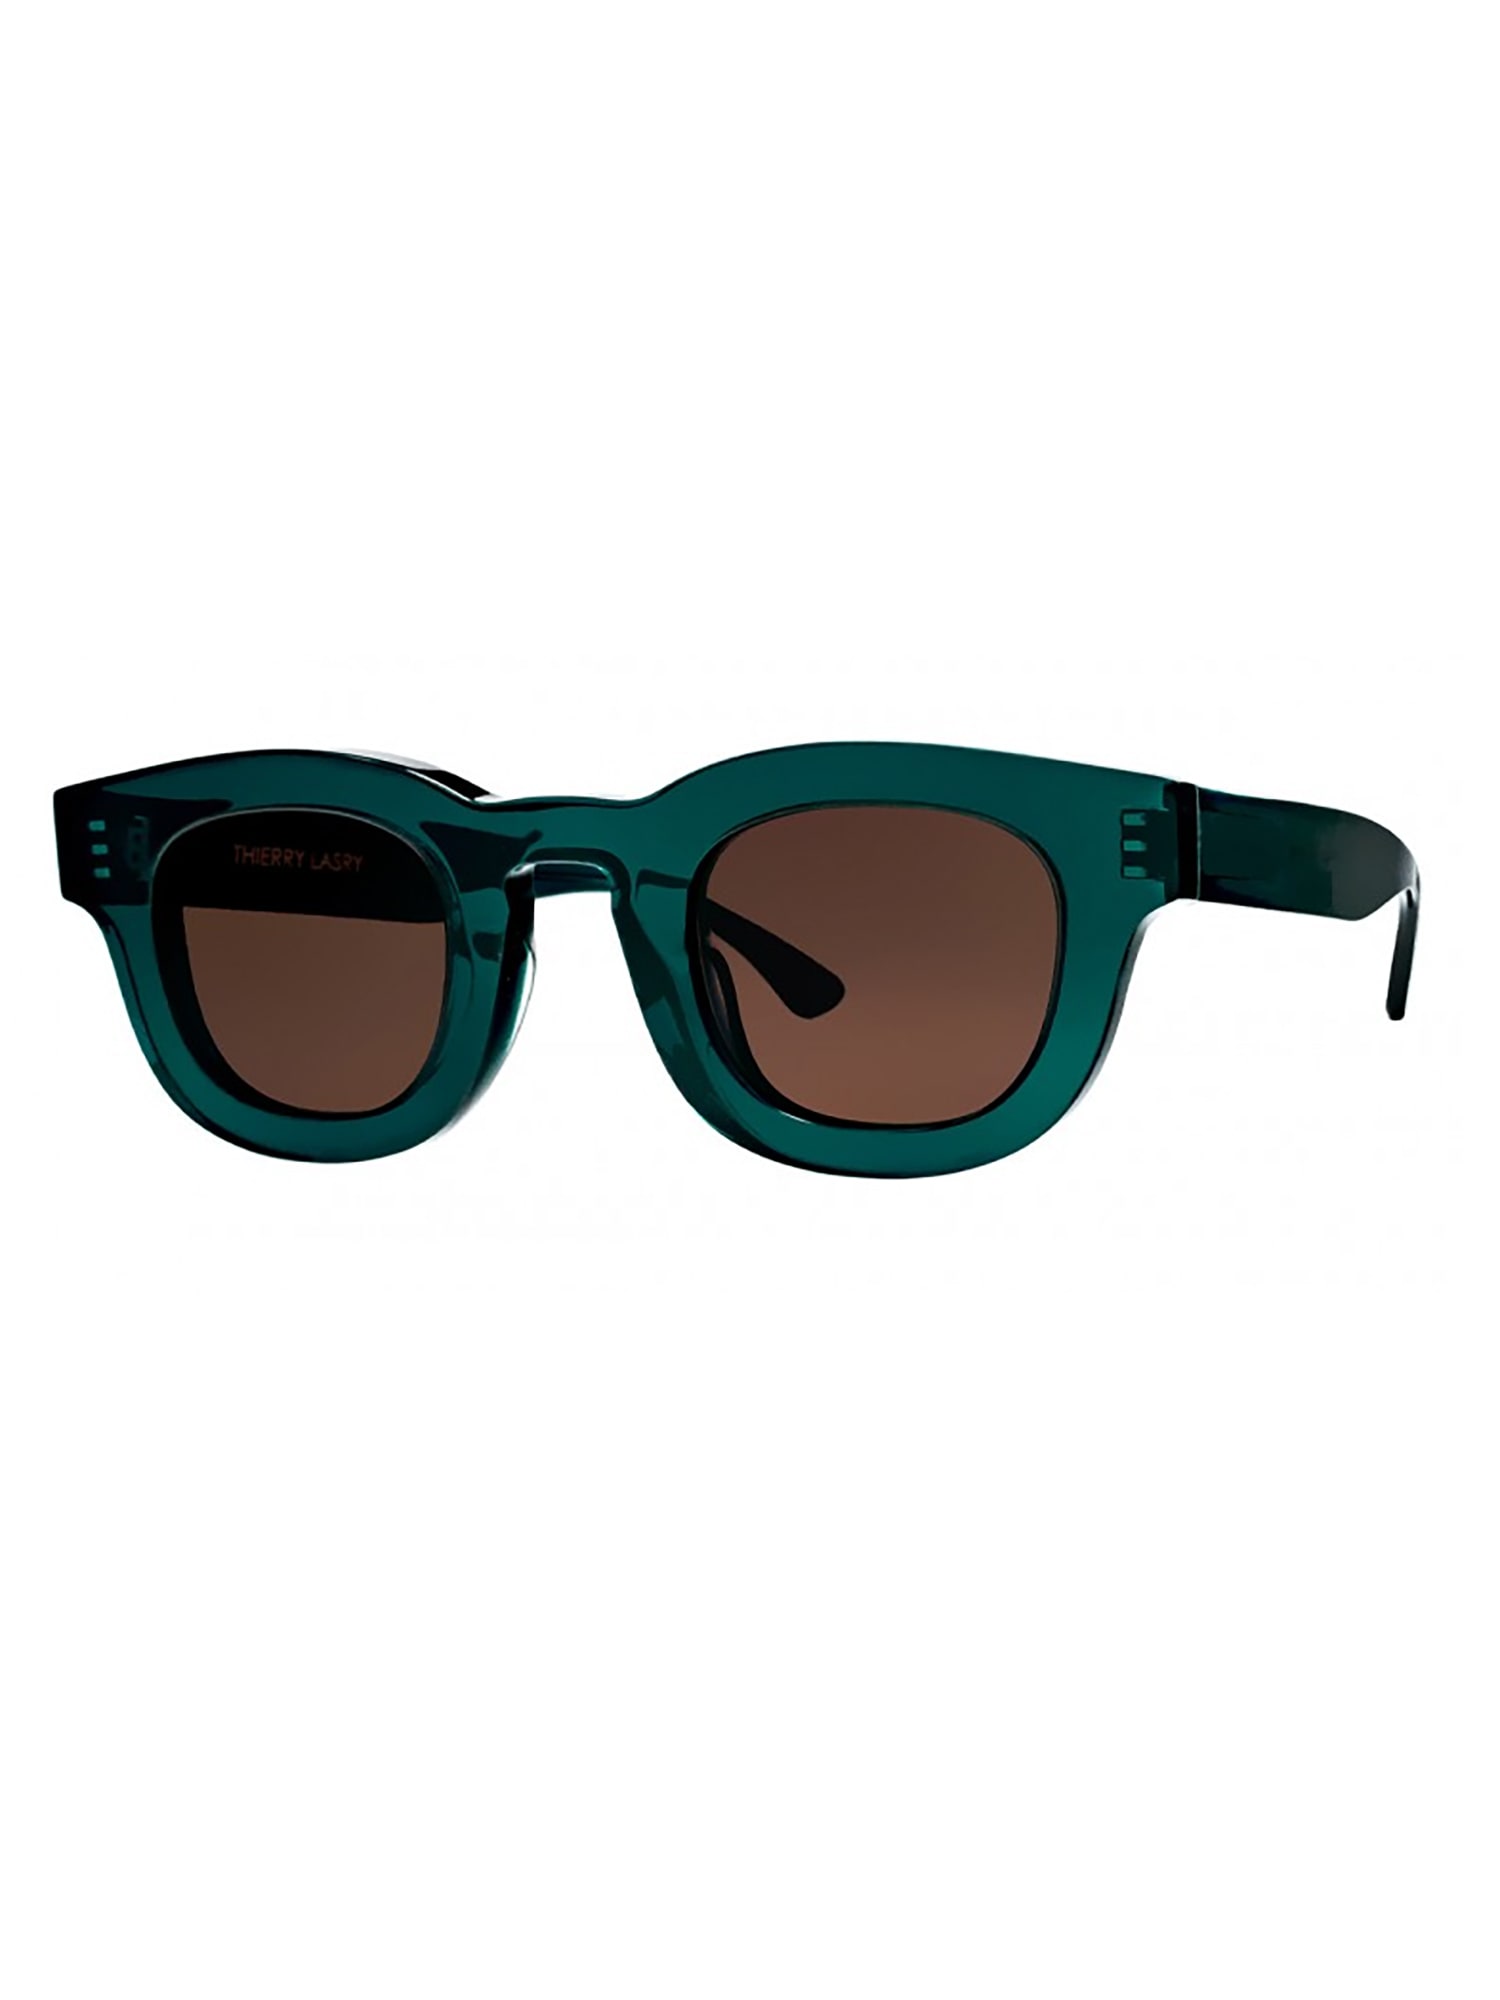 Shop Thierry Lasry Darksidy Sunglasses